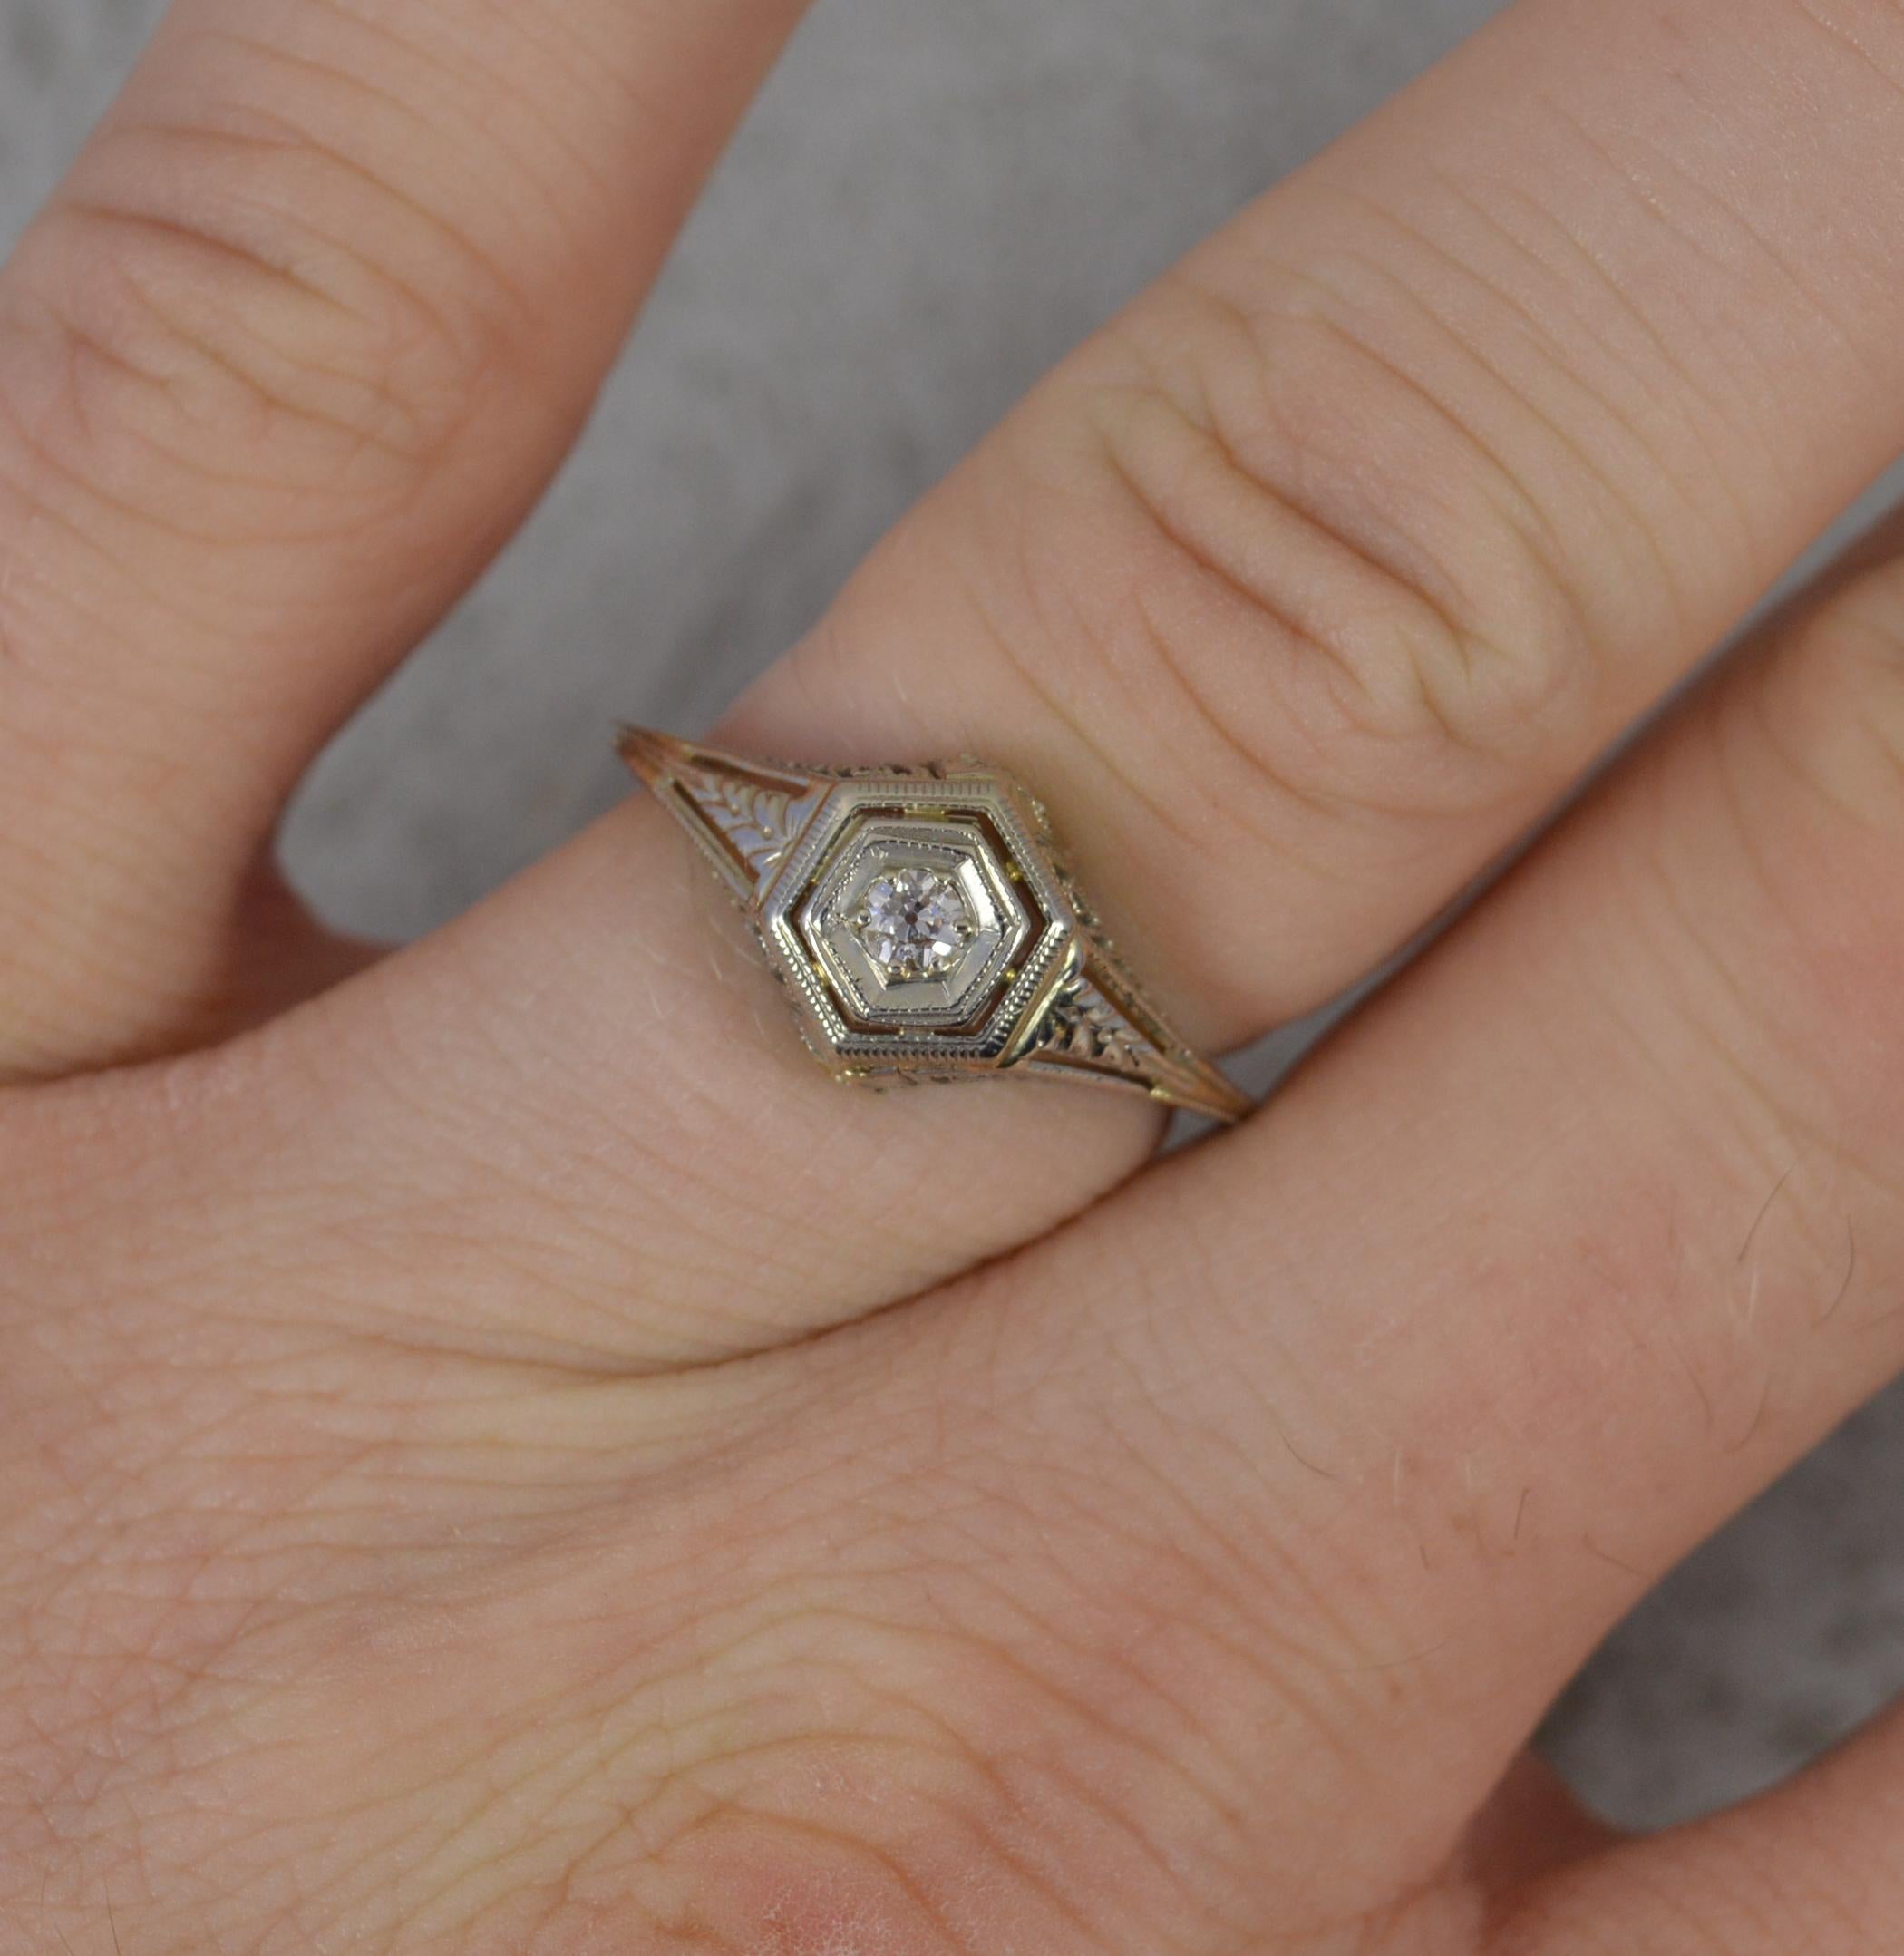 An antique diamond ring circa 1920.
Solid 18 carat white gold example throughout.
Set with a single, natural, old European cut diamond into a hexagonal head with pierced filigree finish.
9.3mm wide band to front.

CONDITION ; Very good. Crisp claws.